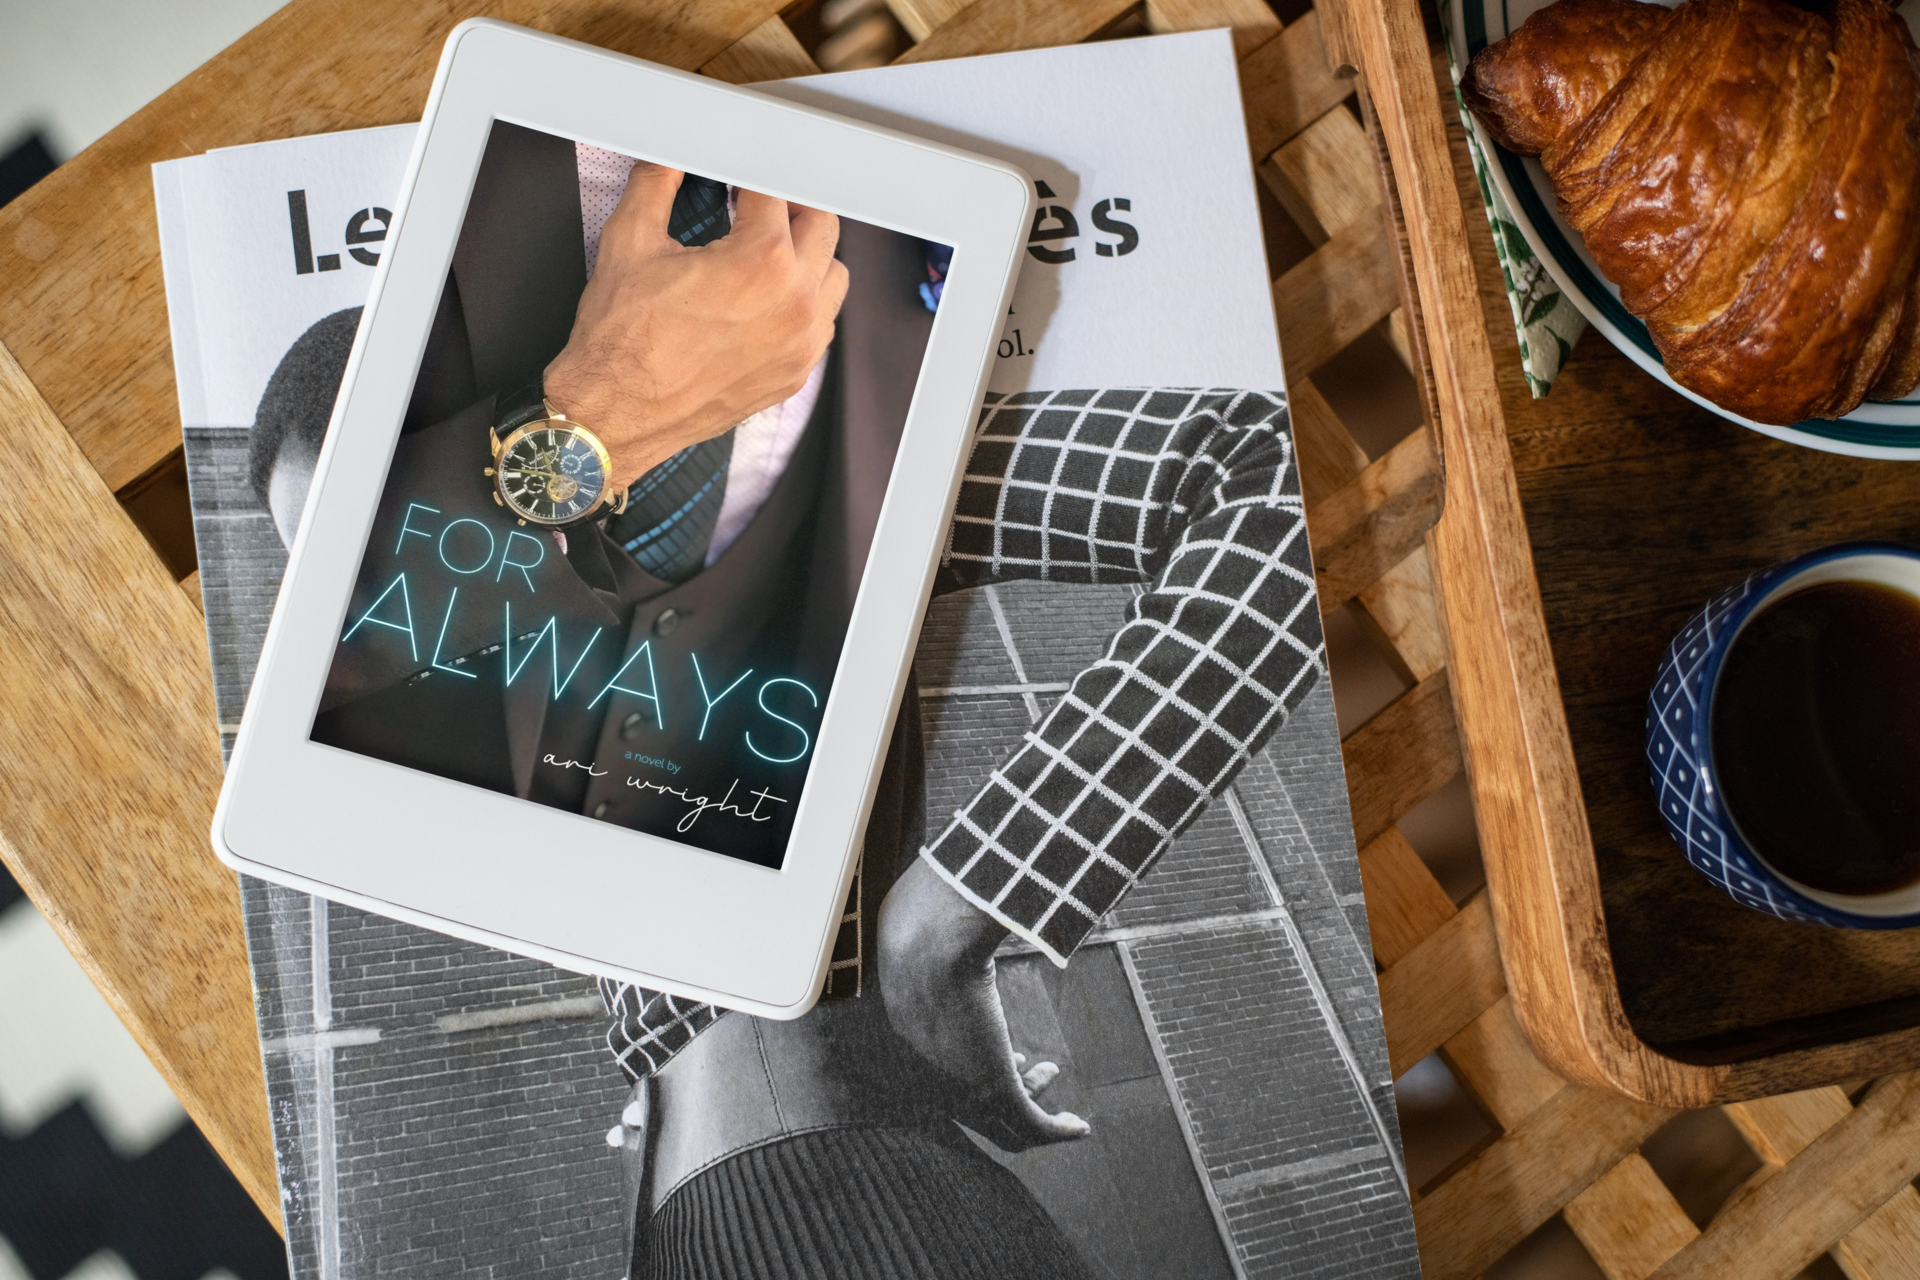 Interview with Ari Wright author of For Always